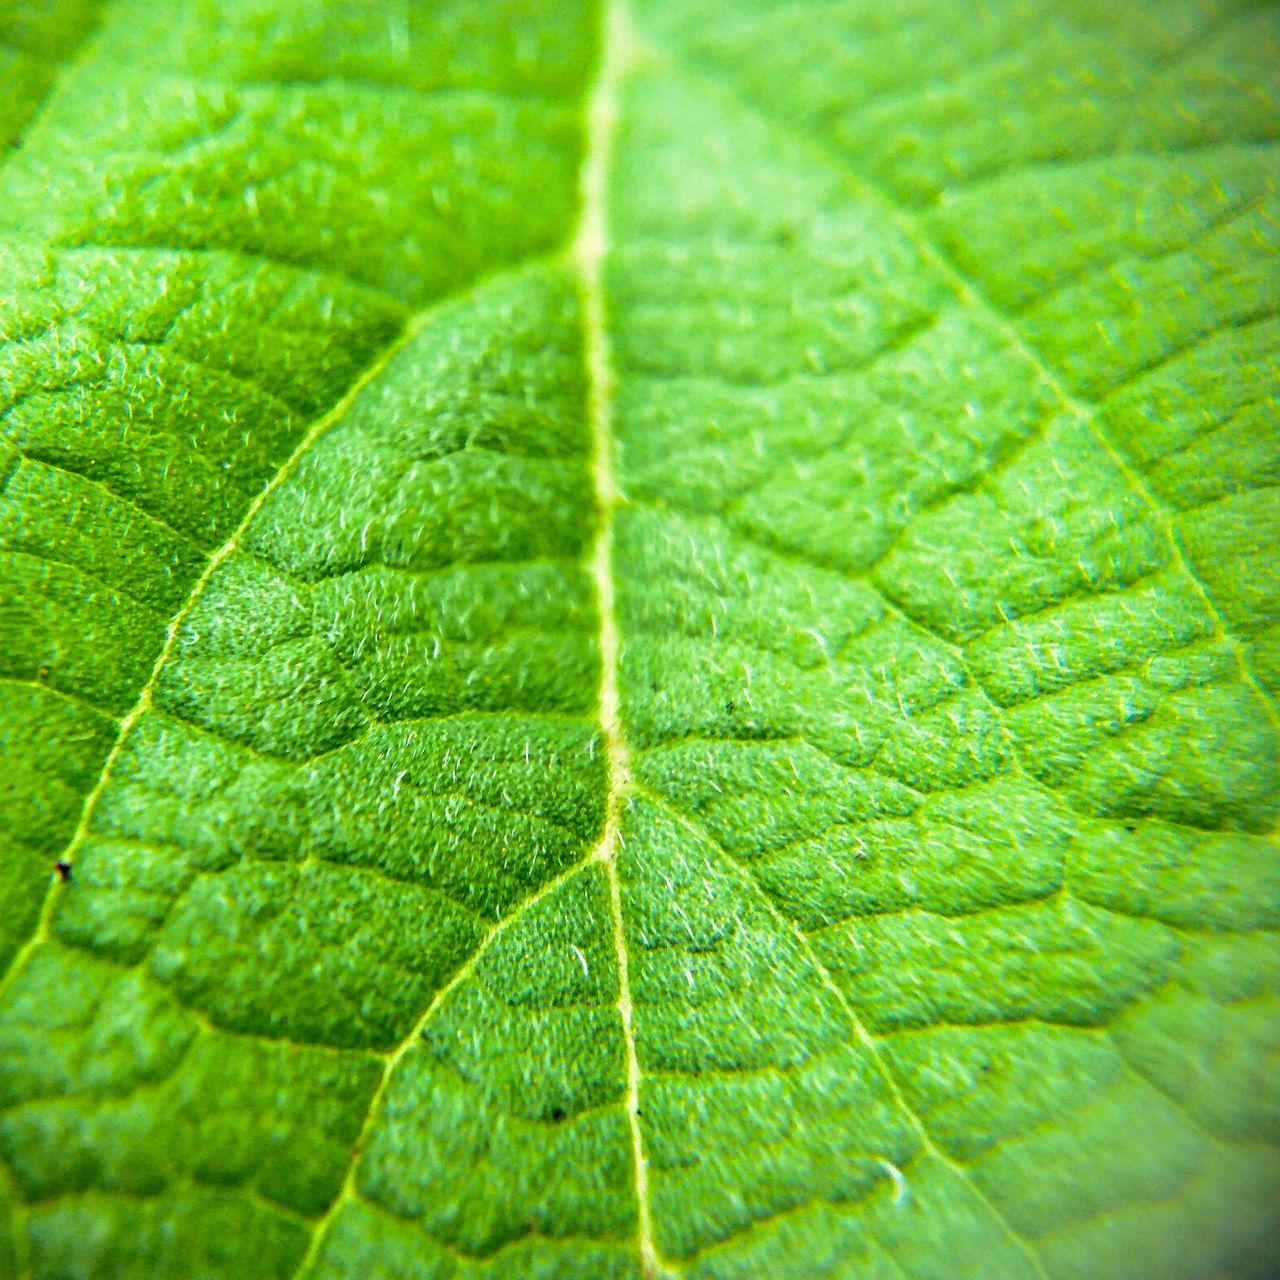 leaf, green color, plant part, full frame, close-up, plant, backgrounds, no people, leaf vein, nature, freshness, growth, macro, extreme close-up, textured, beauty in nature, pattern, day, outdoors, selective focus, textured effect